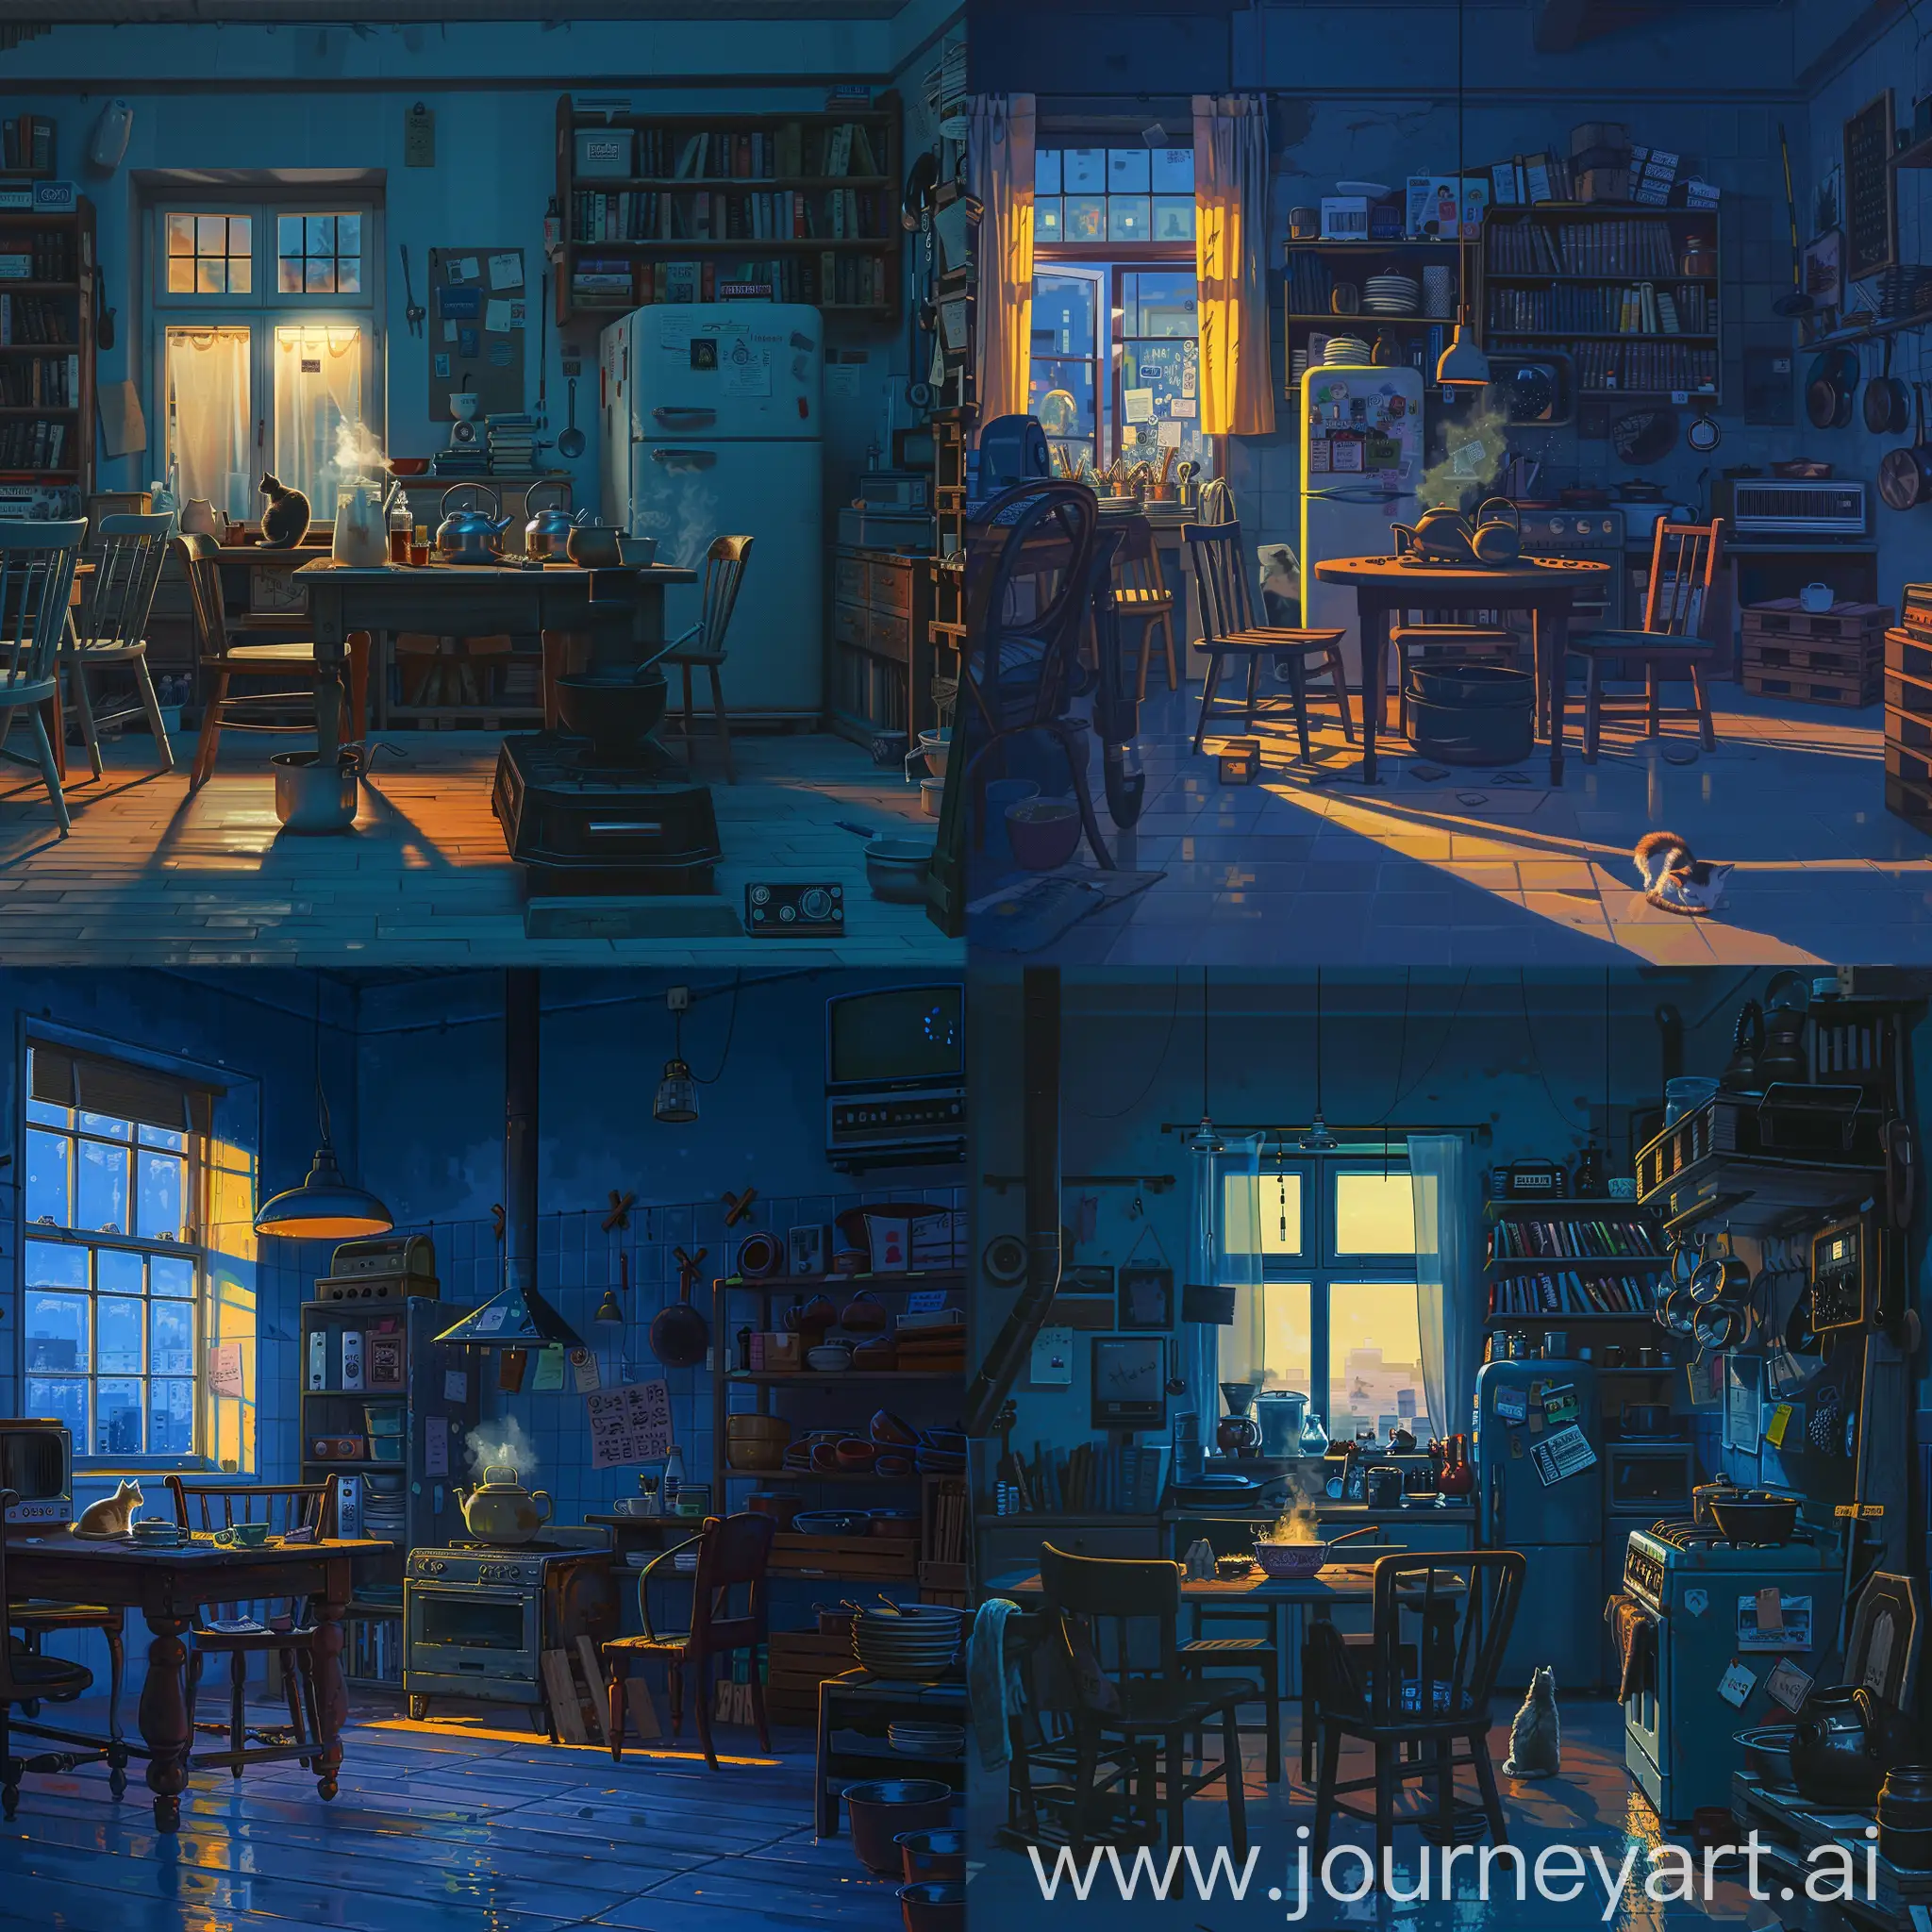 Imagine a spacious communal apartment room in the twilight hours, filled with an assortment of objects that speak of everyday life: boiling old teapot on old stove. There's not a single new item in the room.  The room is cast in deep blue shadows, offset by warm, dark yellow light filtering through a window, reminiscent of the setting sun. This subtle illumination reveals a cat sitting by the window, adding life to the scene. The room is densely populated with communal objects: a sturdy dining table, multiple chairs of different styles, a bookshelf overflowing with well-thumbed books, an aged refrigerator with magnets and notes, a vintage radio perched on a small table, and various pots and pans hanging from hooks on the wall. Wooden pallet pinned to the wall. The atmosphere is thick with the stories of the many tenants who have passed through. Please create an image that is rich in detail, photorealistic, and filled with these elements, capturing the essence of a shared historical narrative within this communal apartment space